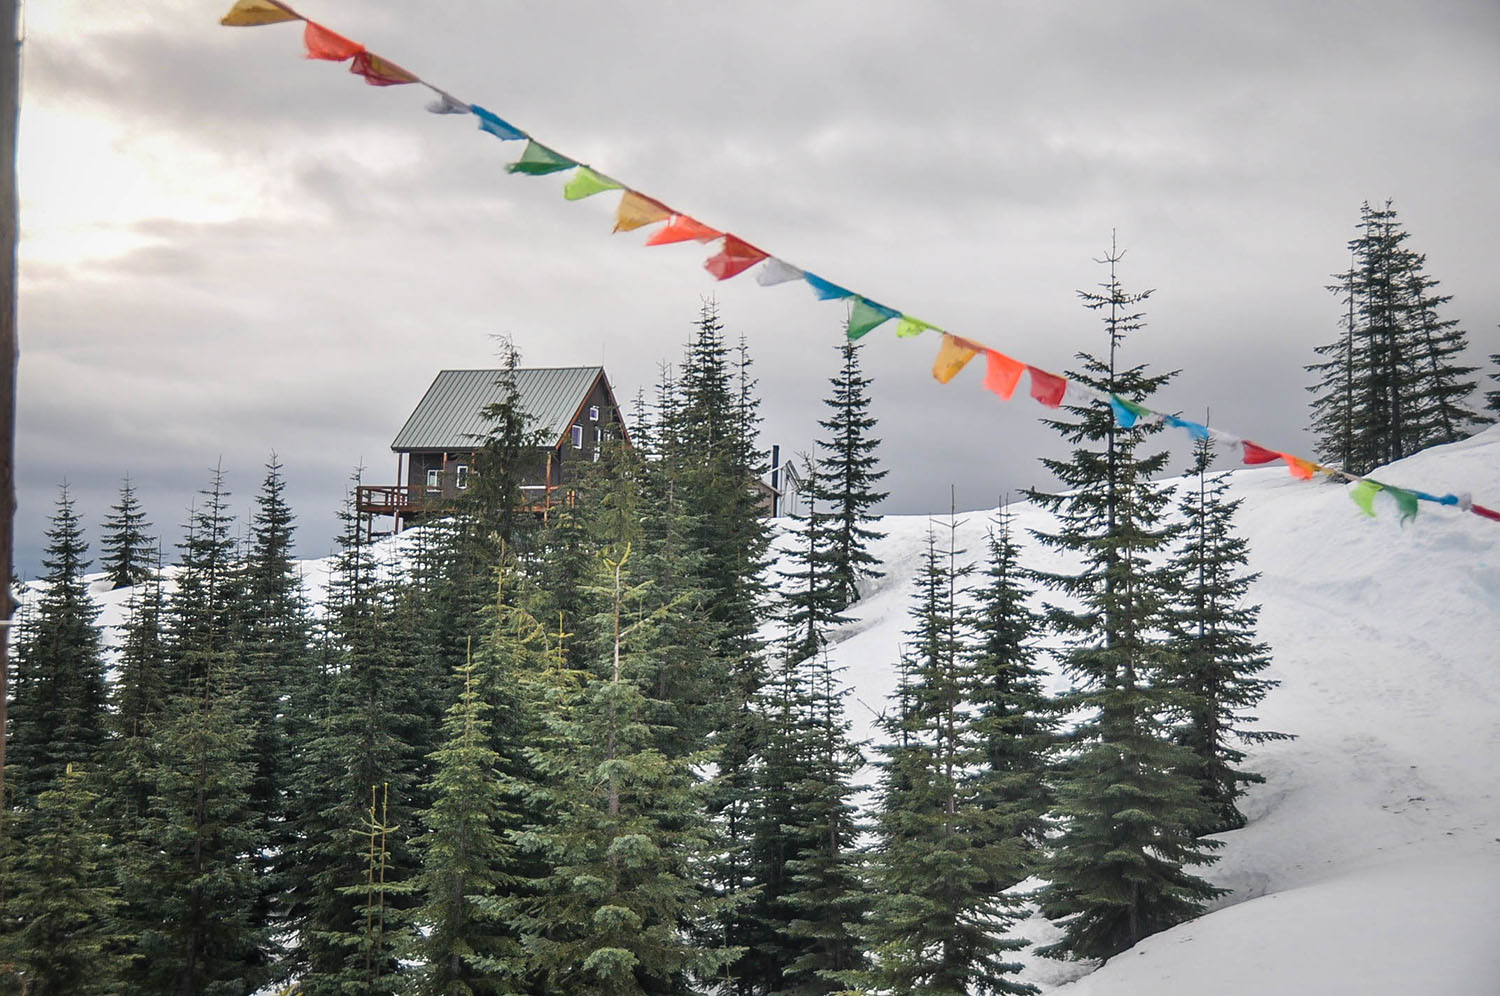 Best Things to Do in Washington State Mountain Hut